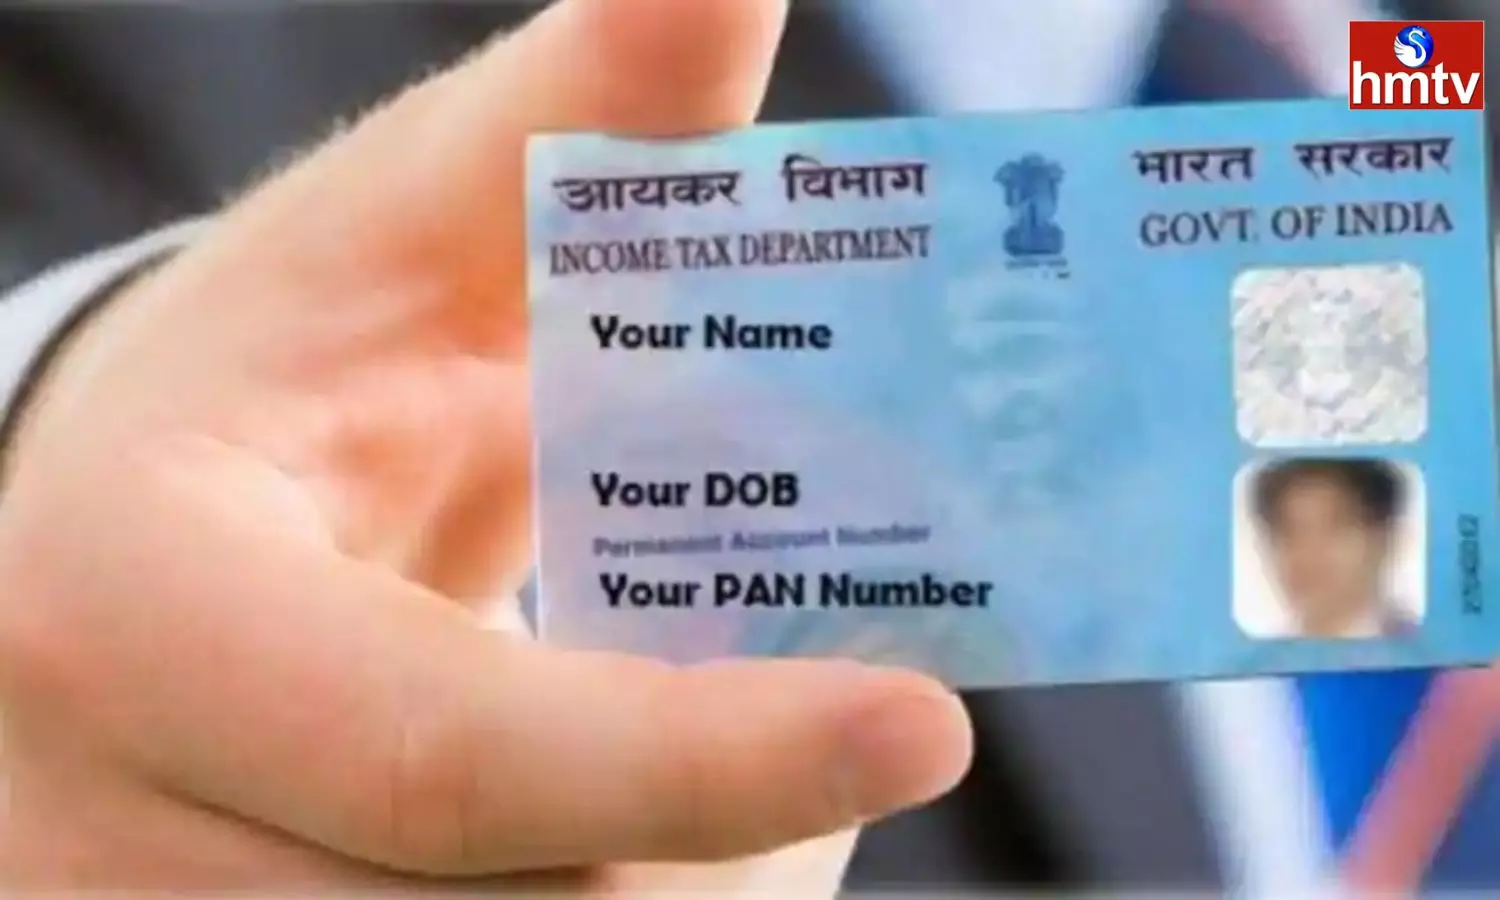 Pan Card 10 20 years old then change or order Duplicate Card